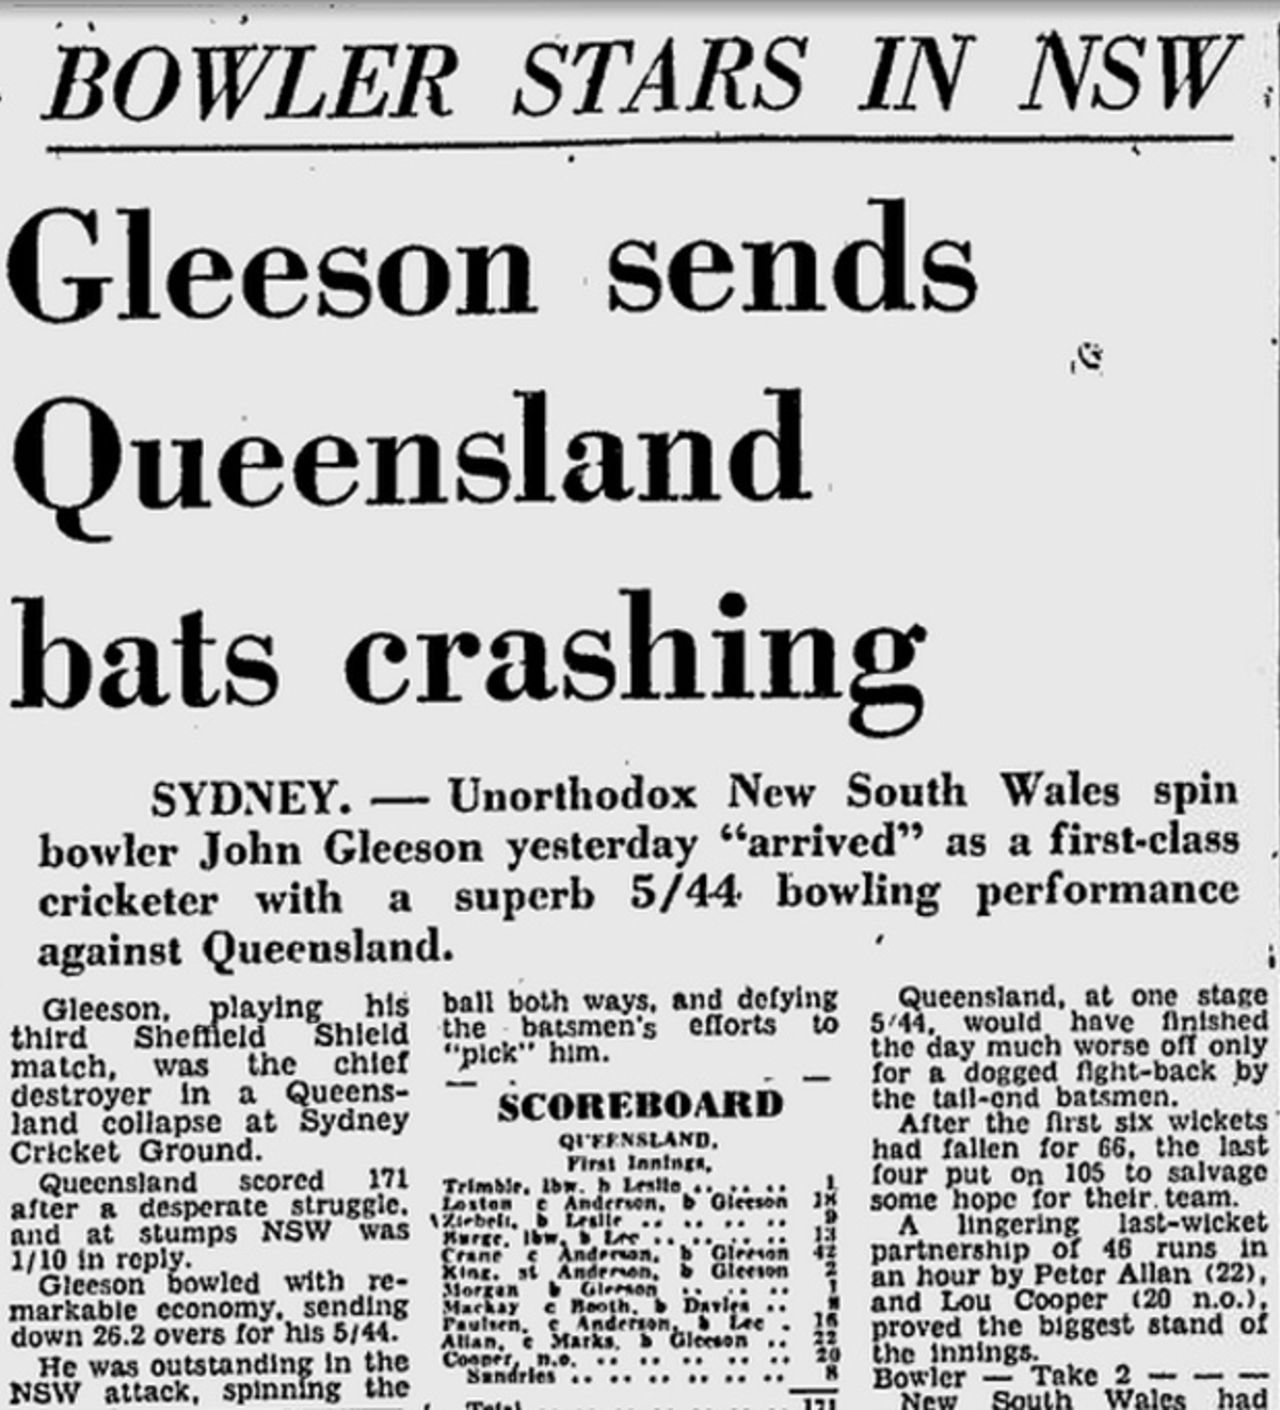 A news report on John Gleeson's five-wicket haul against Queensland, New South Wales v Queensland, Sheffield Shield, Sydney, December 31, 1966